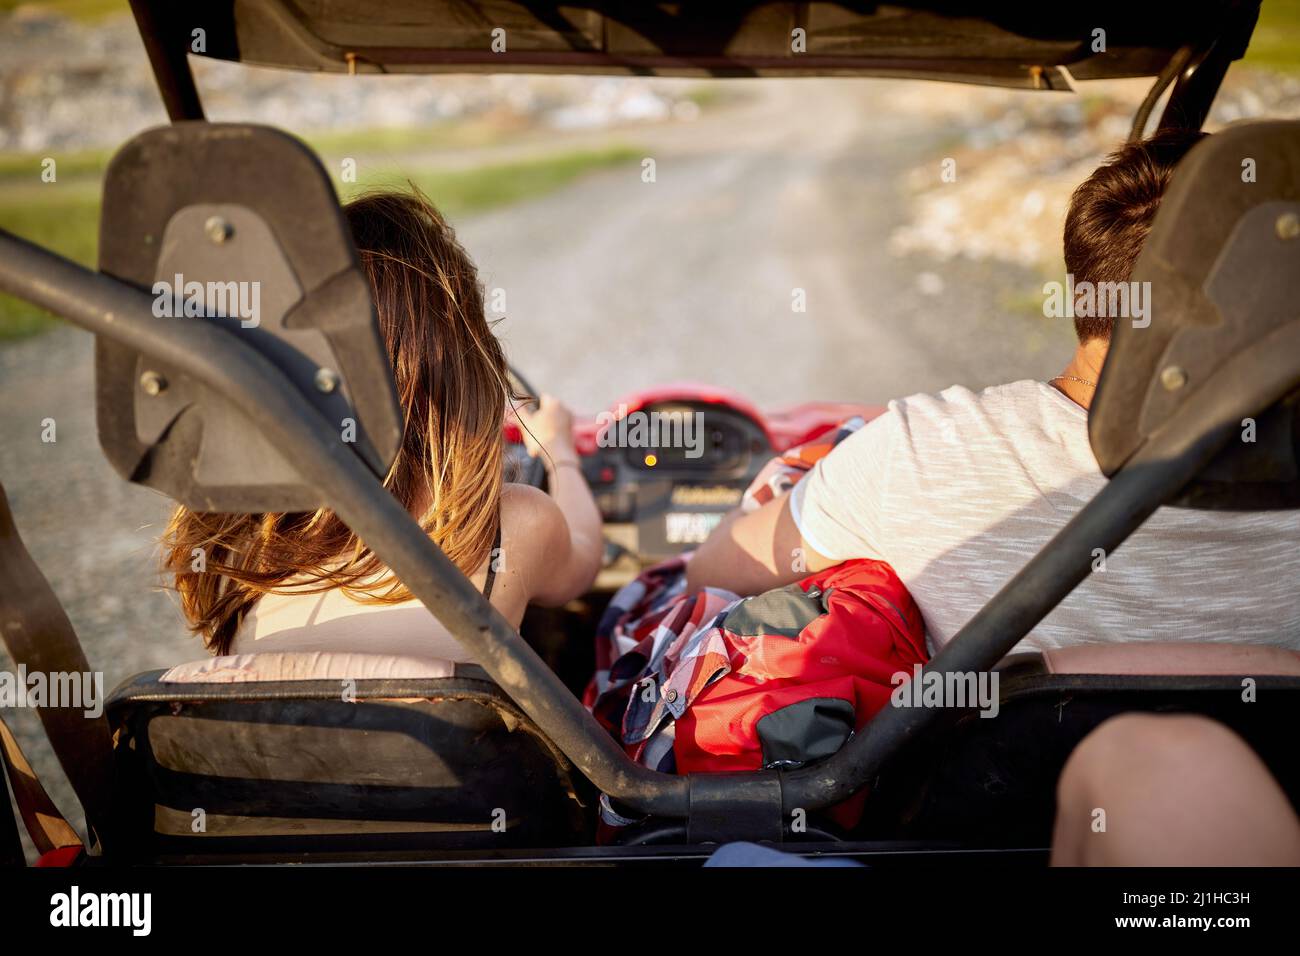 Young friends on an off road adventure, summertime, mountain landscape. Freedom, friendship, nature concept. Stock Photo